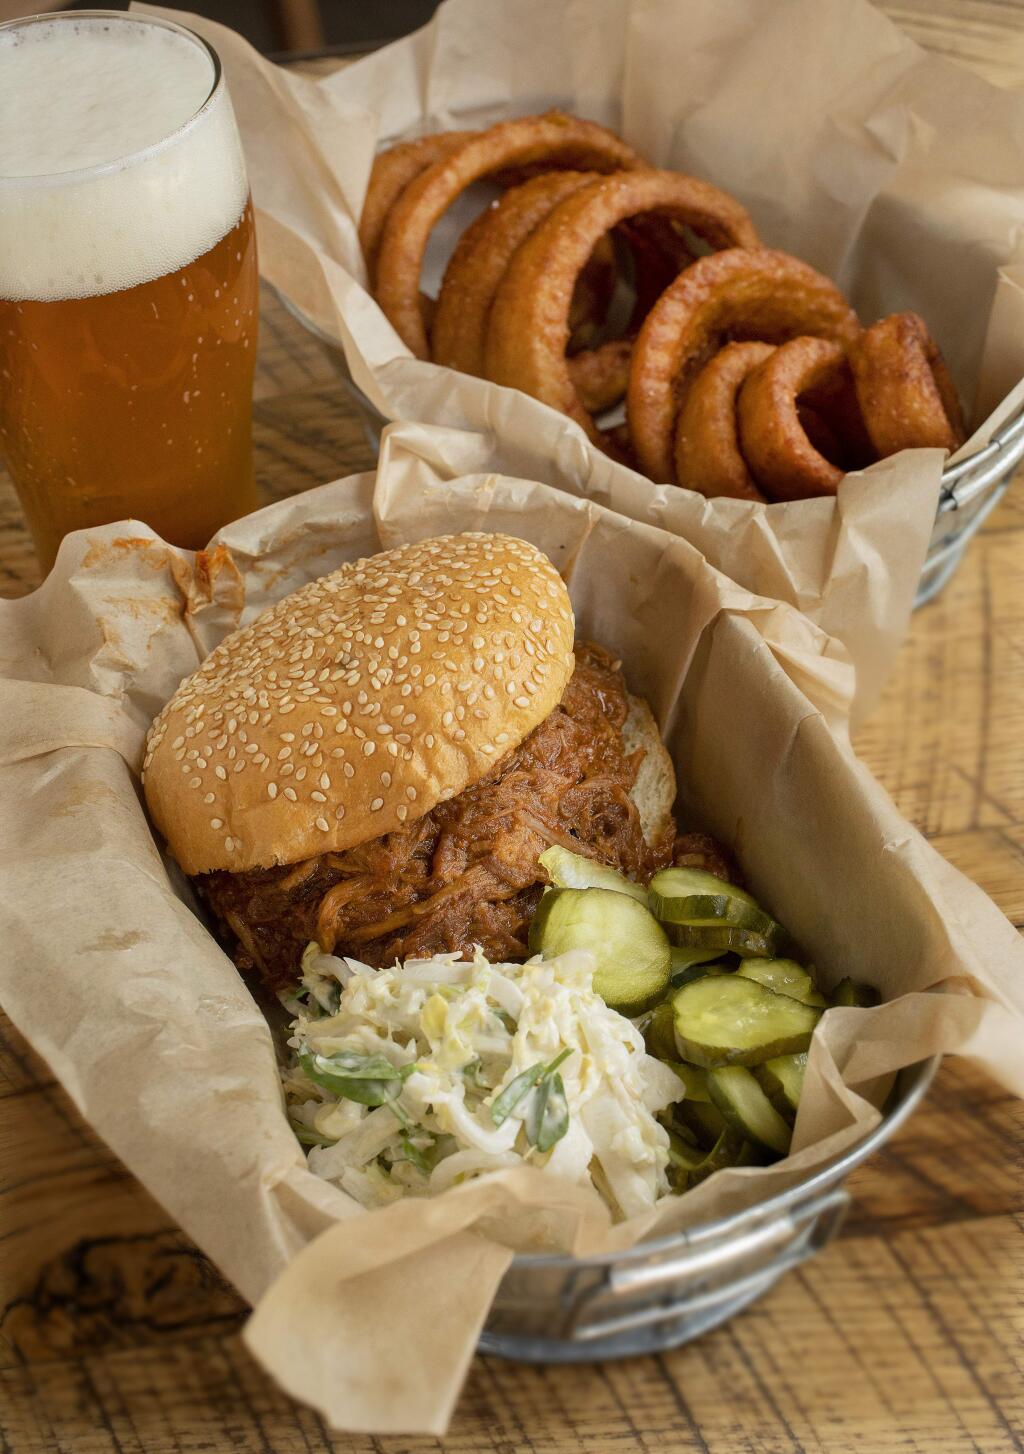 Berkwood Farms Pulled Pork Shoulder Sandwich with slaw and pickles with a side of Beer Battered Onion Rings from Roadhouse 29 at the Freemark Abbey Winery in St. Helena. (photo by John Burgess/The Press Democrat)